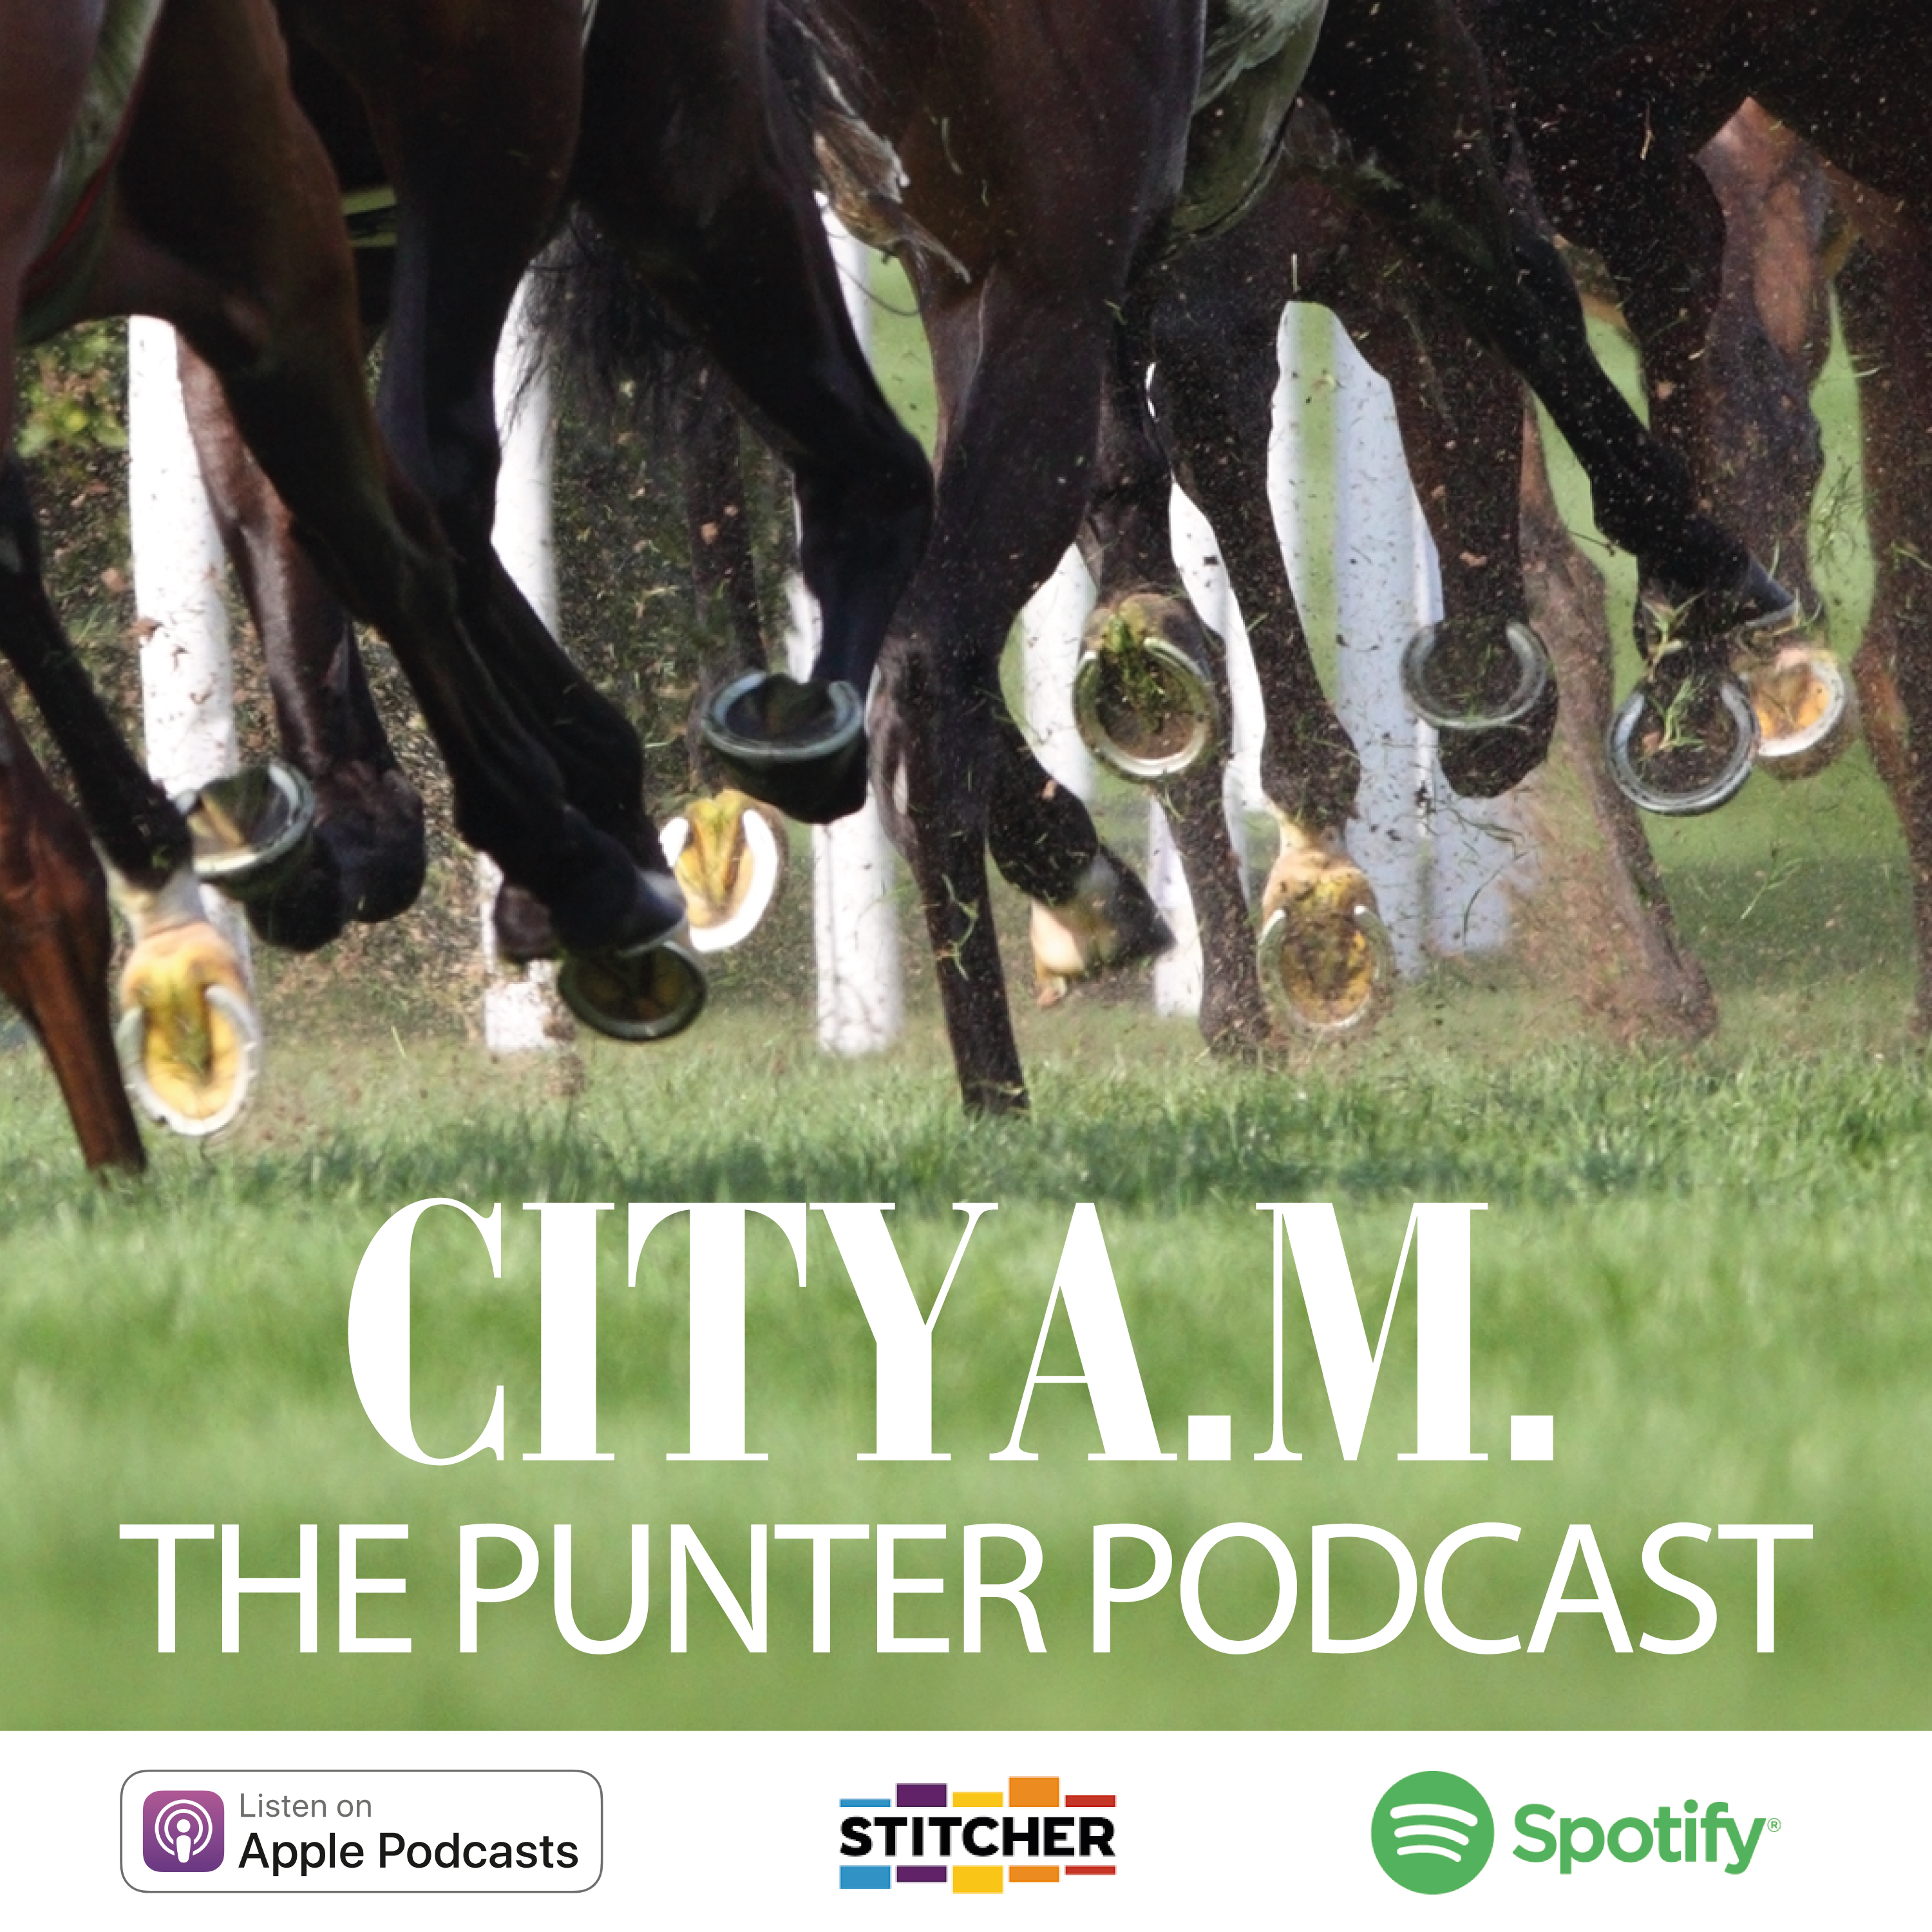 March 4th - Punter Podcast Summary